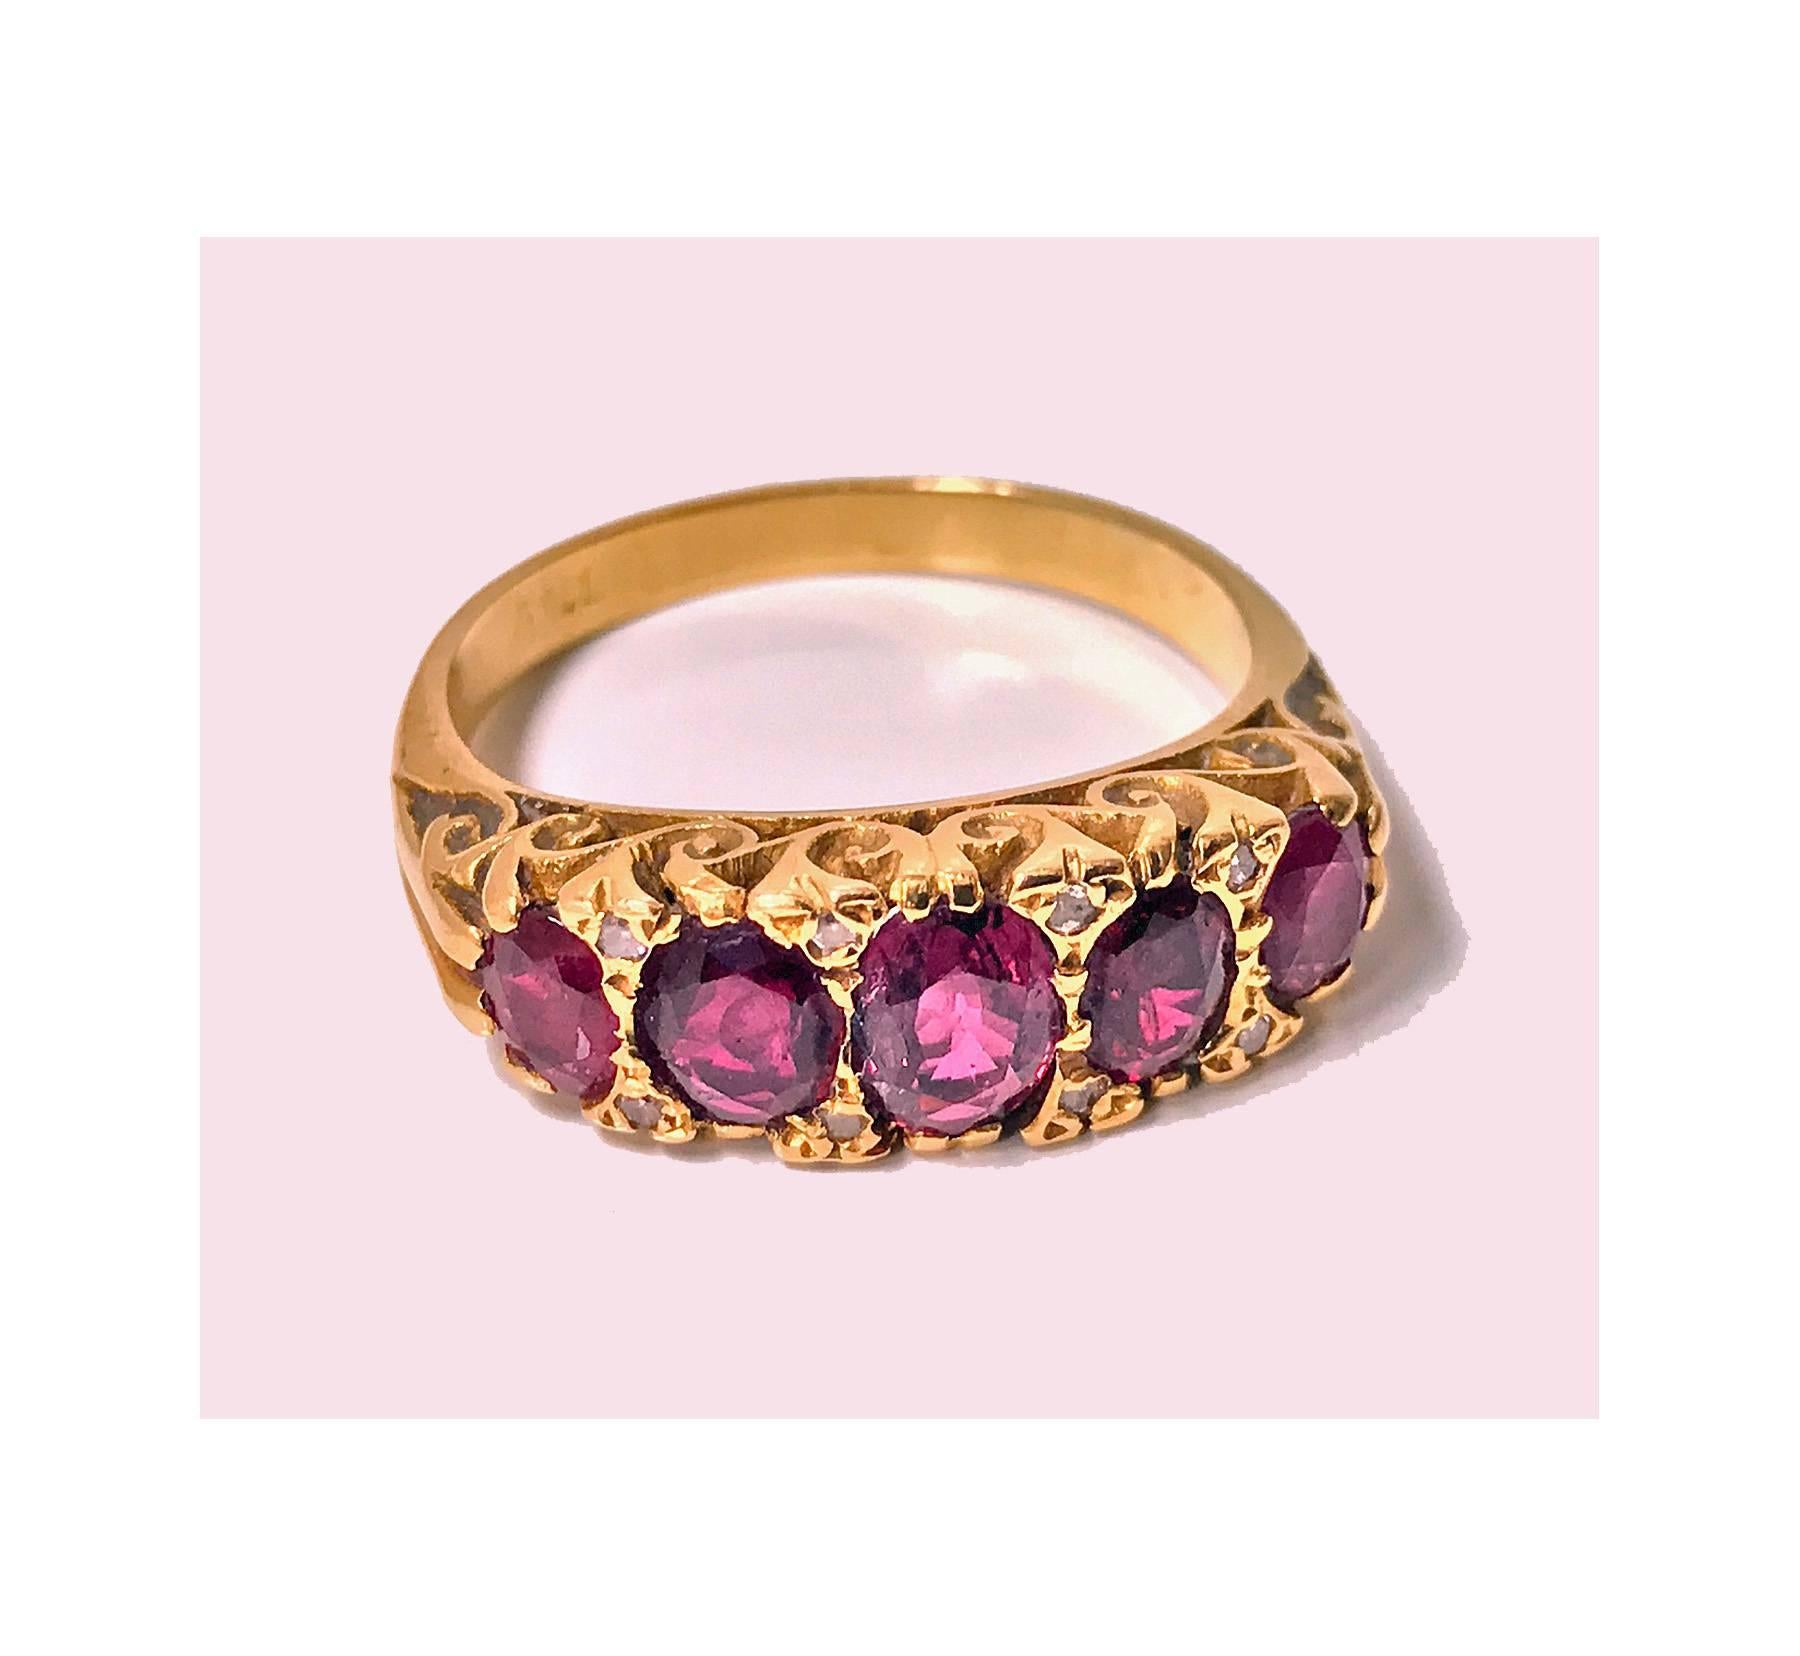 Antique Victorian five stone half hoop Ruby and Diamond 18K Ring, C.1900. The Ring comprising of five graduated oval faceted Purple Red Rubies, weighing a total of approximately 3.00 ct. accented at each corner with a small rose cut diamond. The